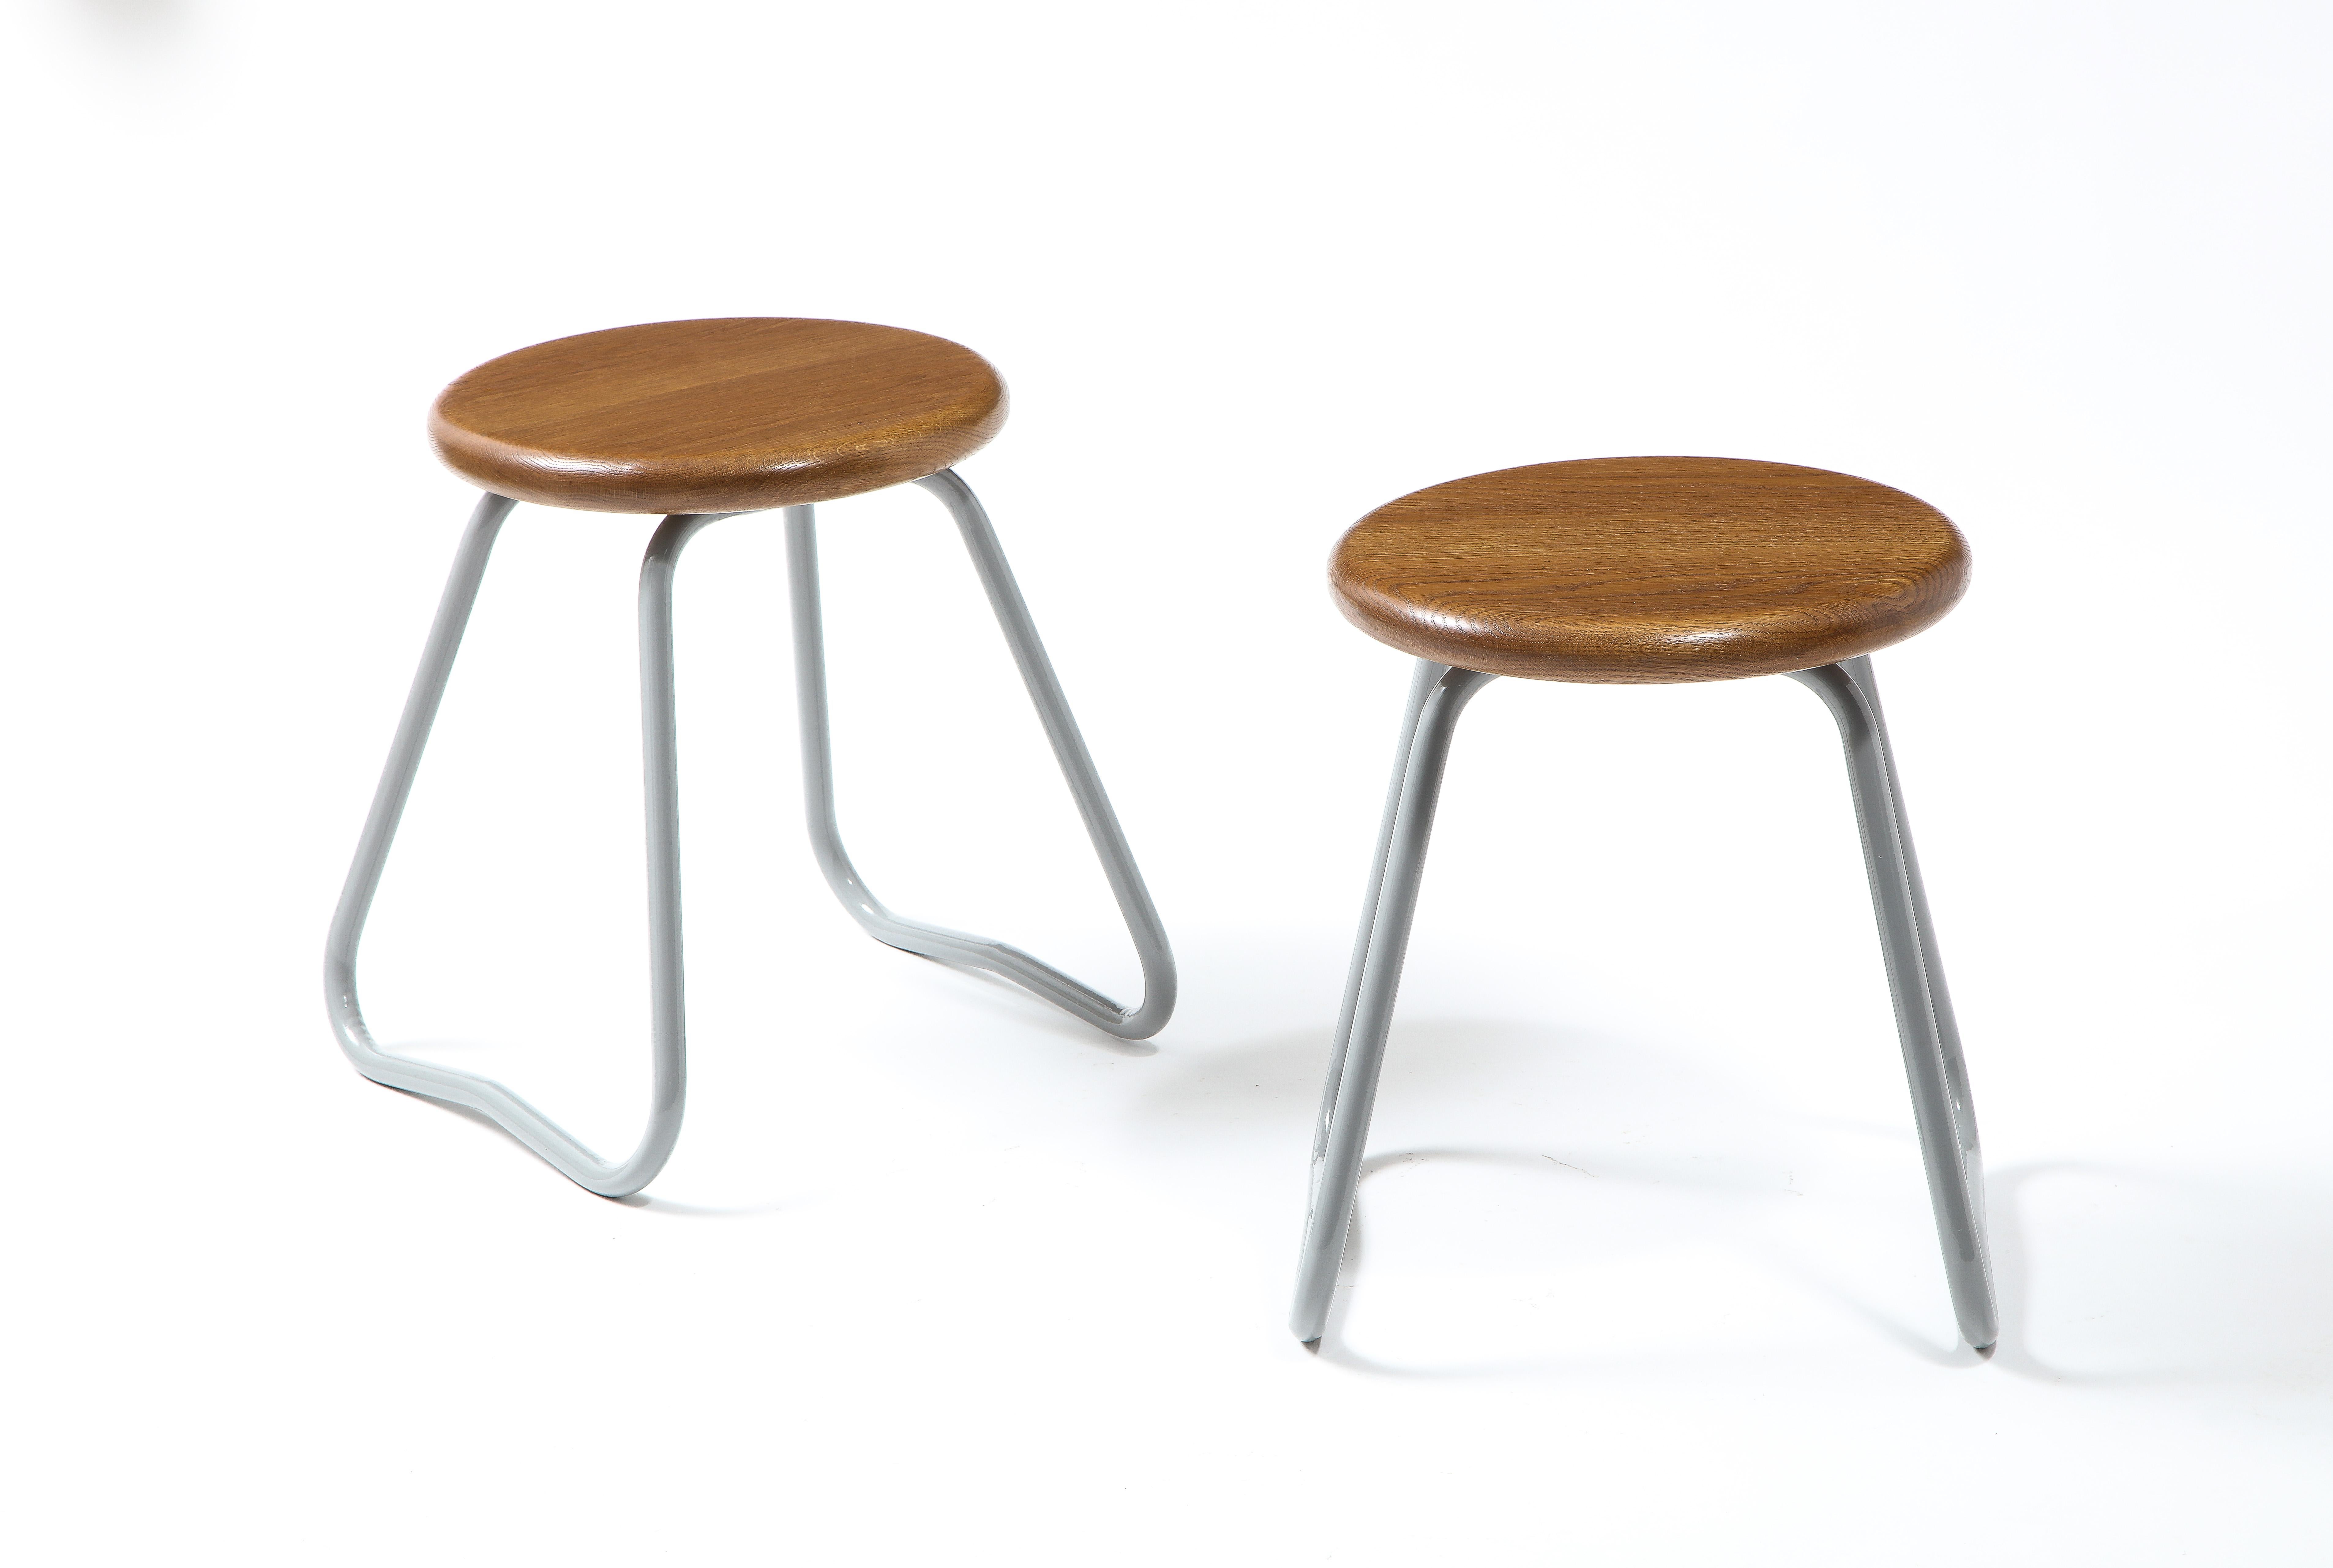 French Steel & Oak Stools, France 1960's For Sale